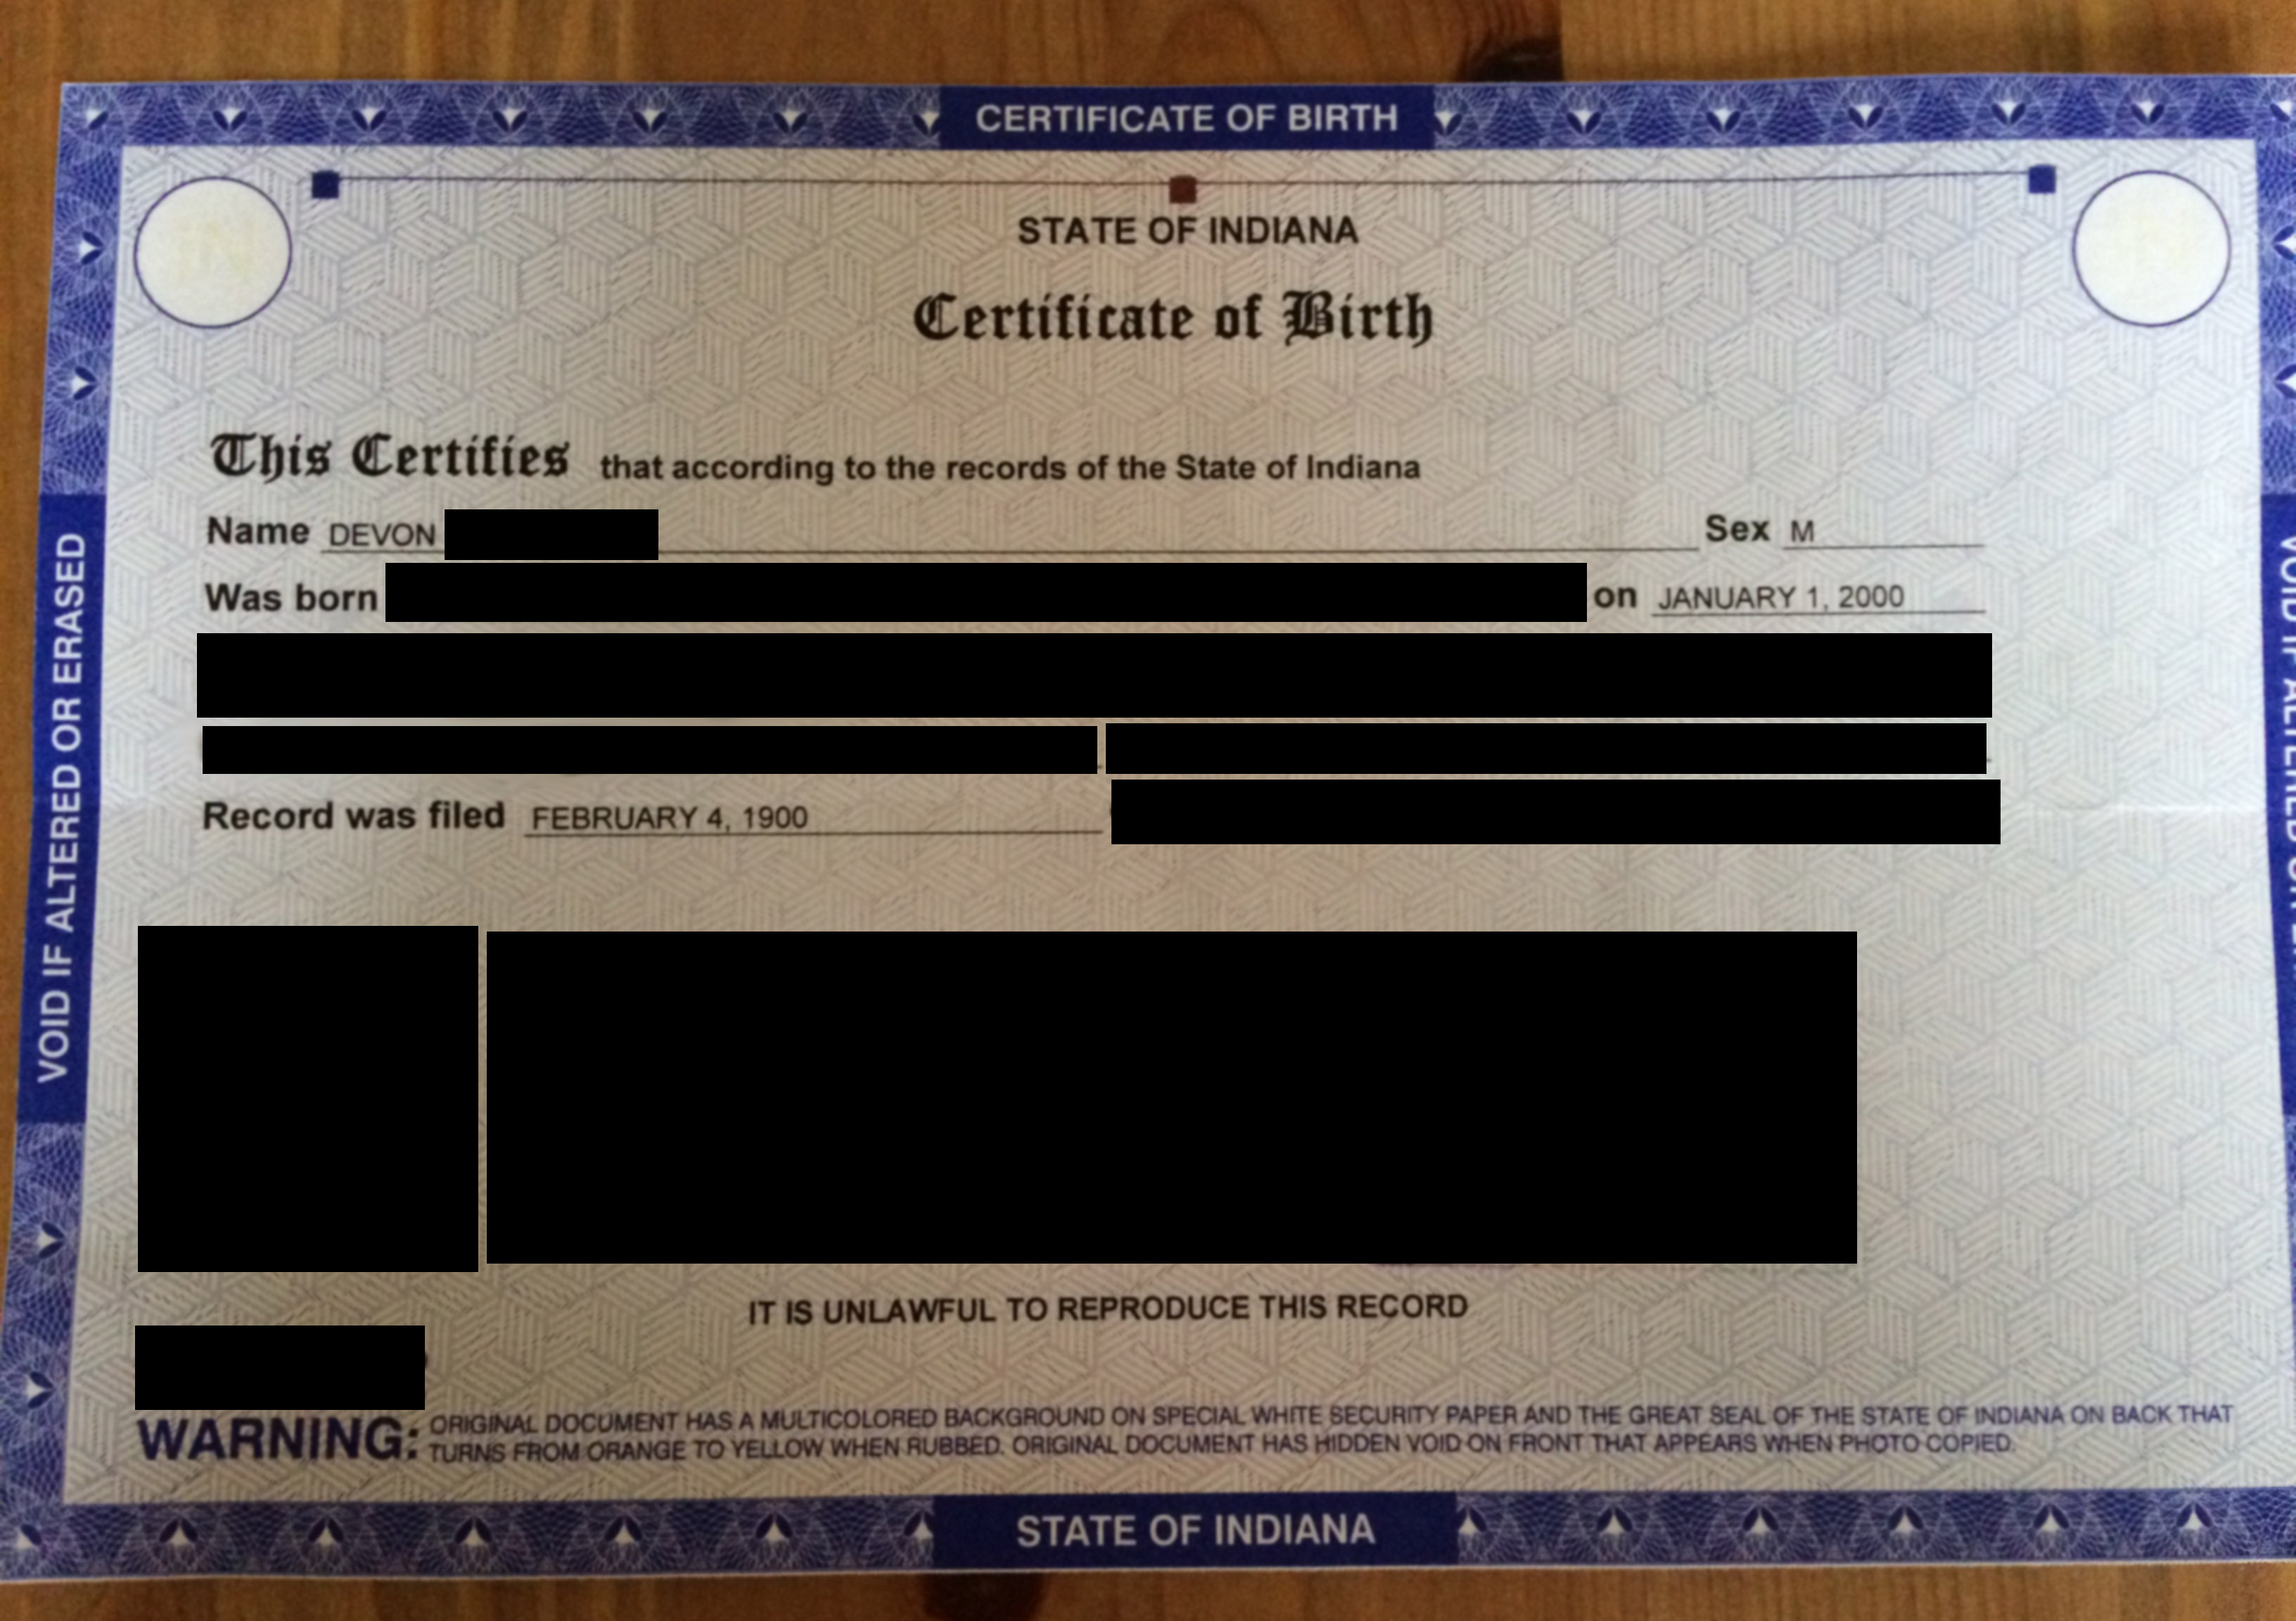 A birth certificate affected by the Y2K bug.